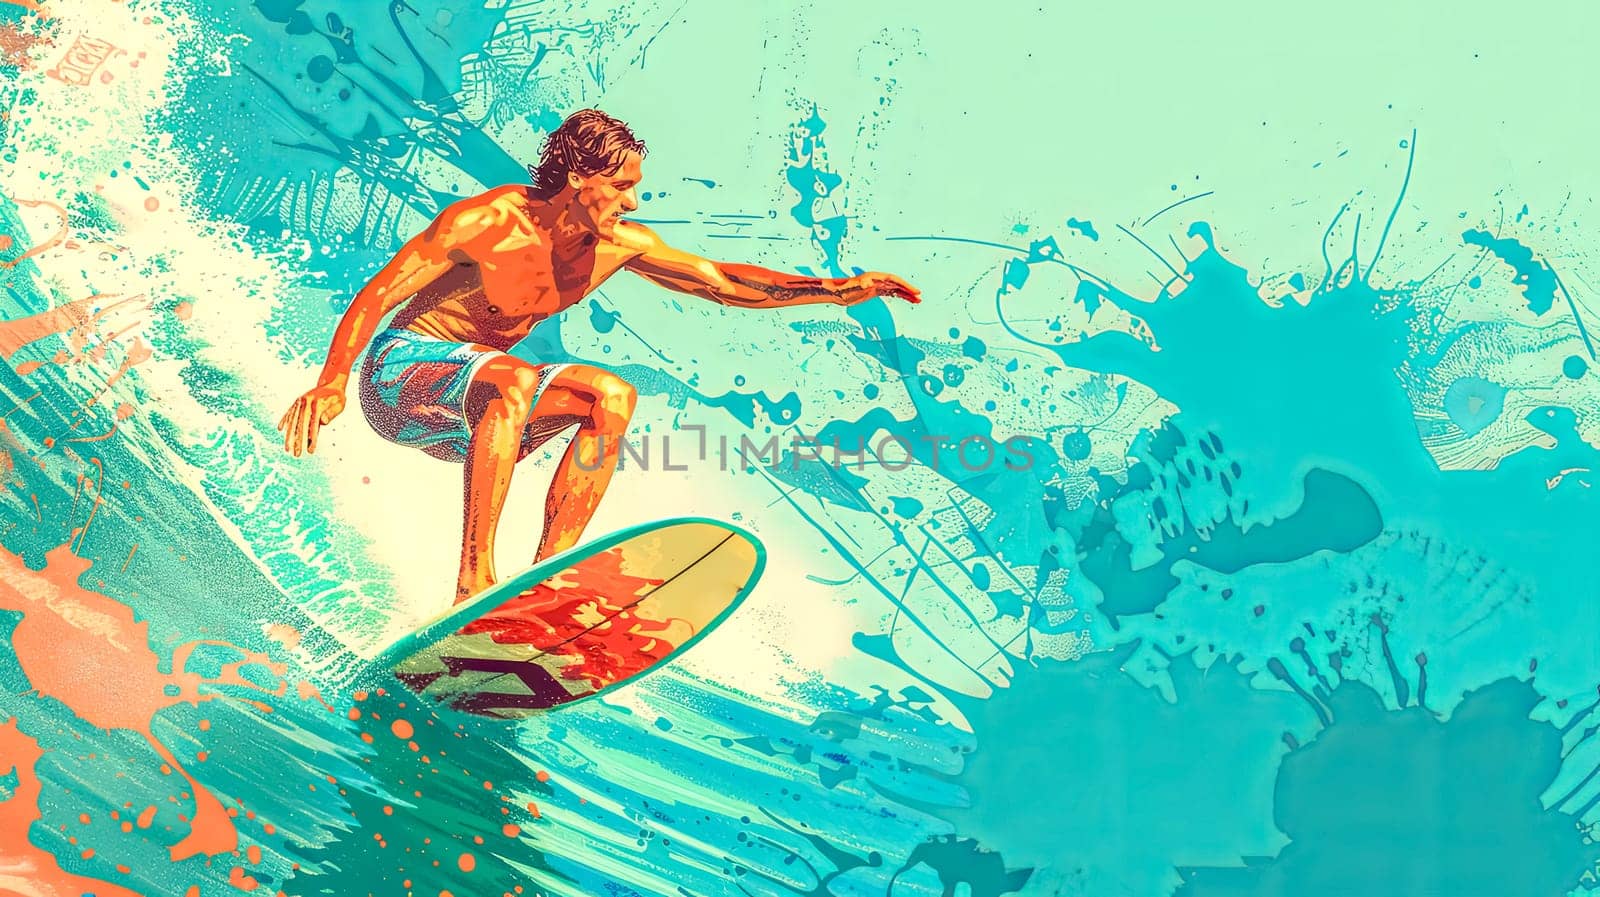 Illustration of a surfer with artistic flair catching a vibrant, splashing wave